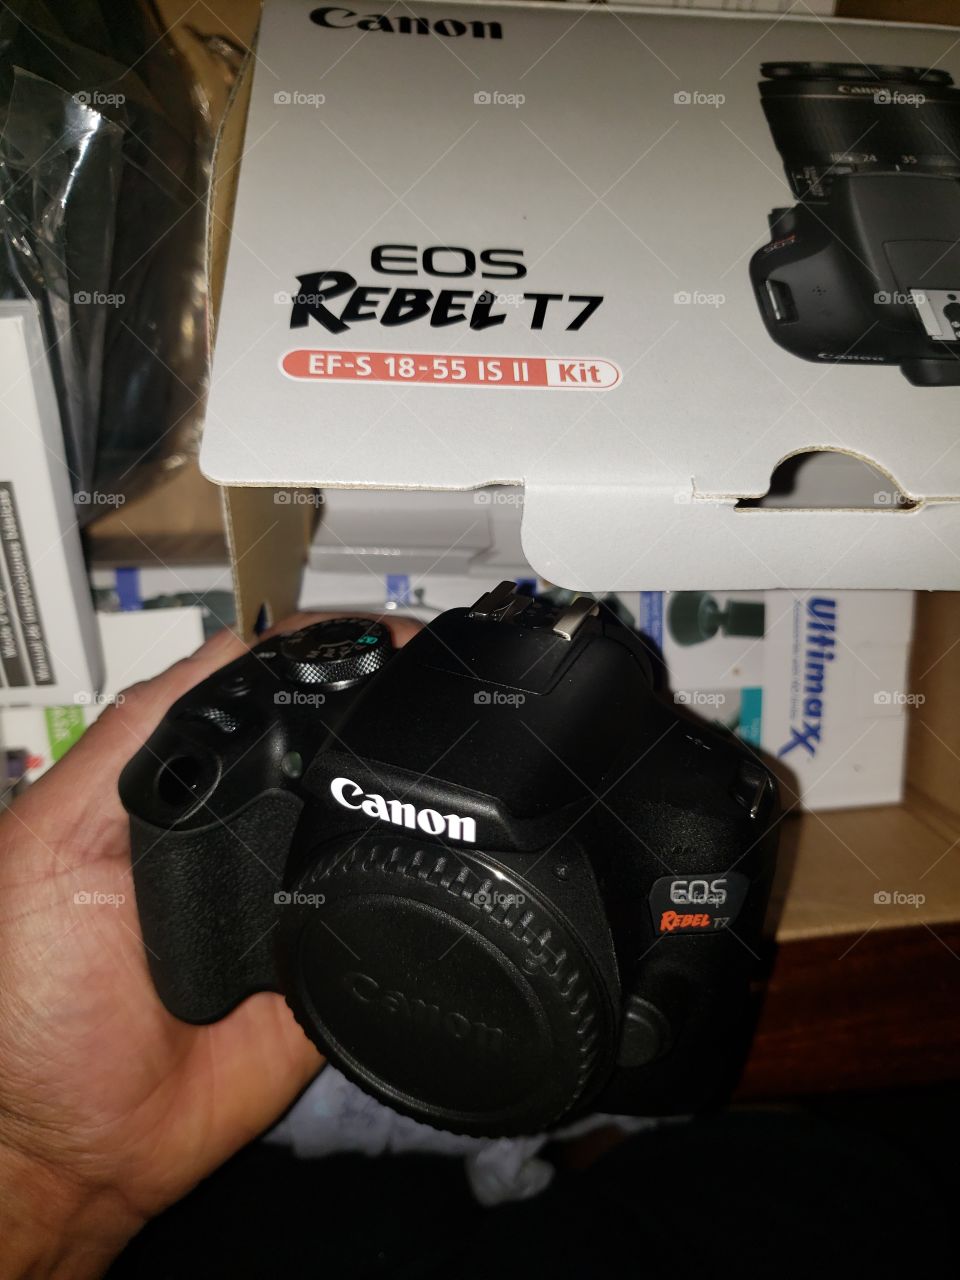 Rebel T7, camera, eos, unboxing, new